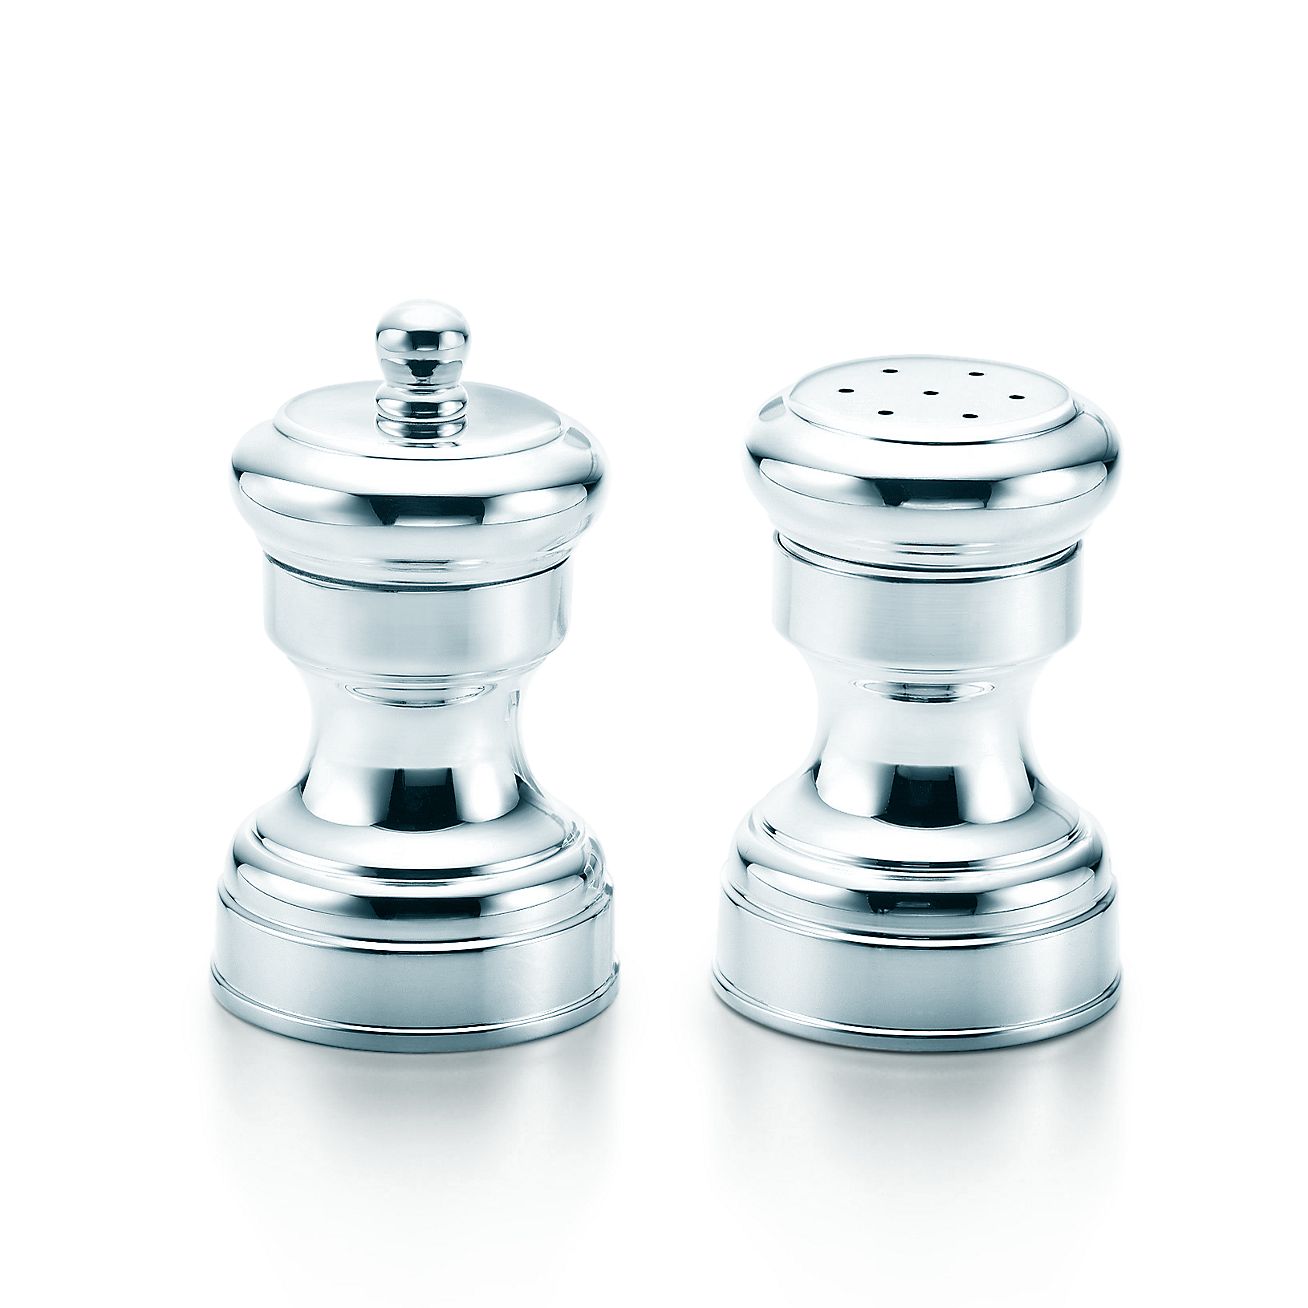 tiffany and co salt and pepper shaker